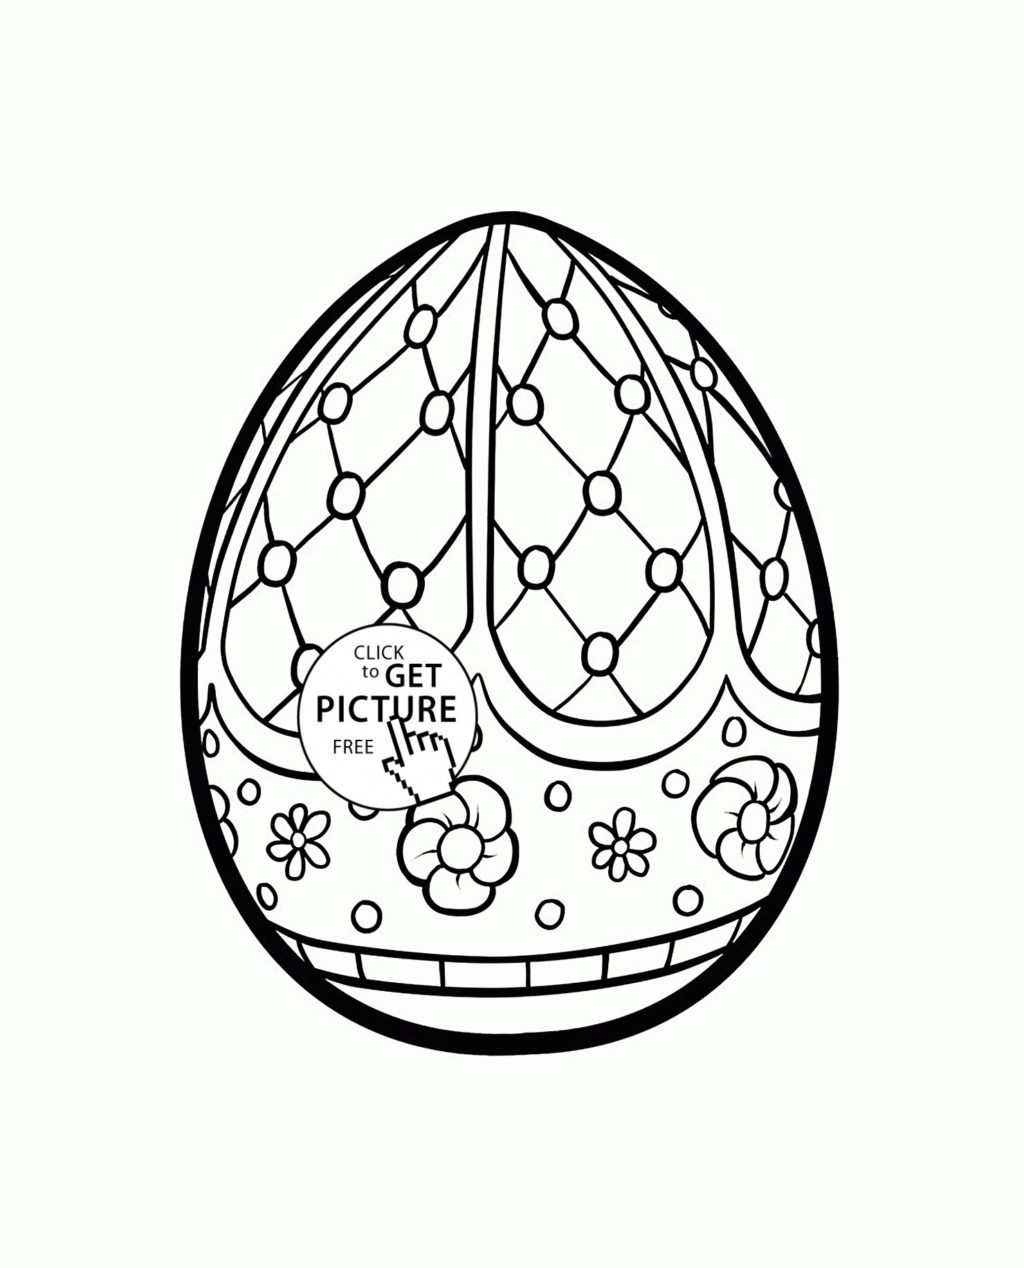 Coloring Pages Of J Coloring Book World Easter Egg Adult Coloring Pages Gallery J